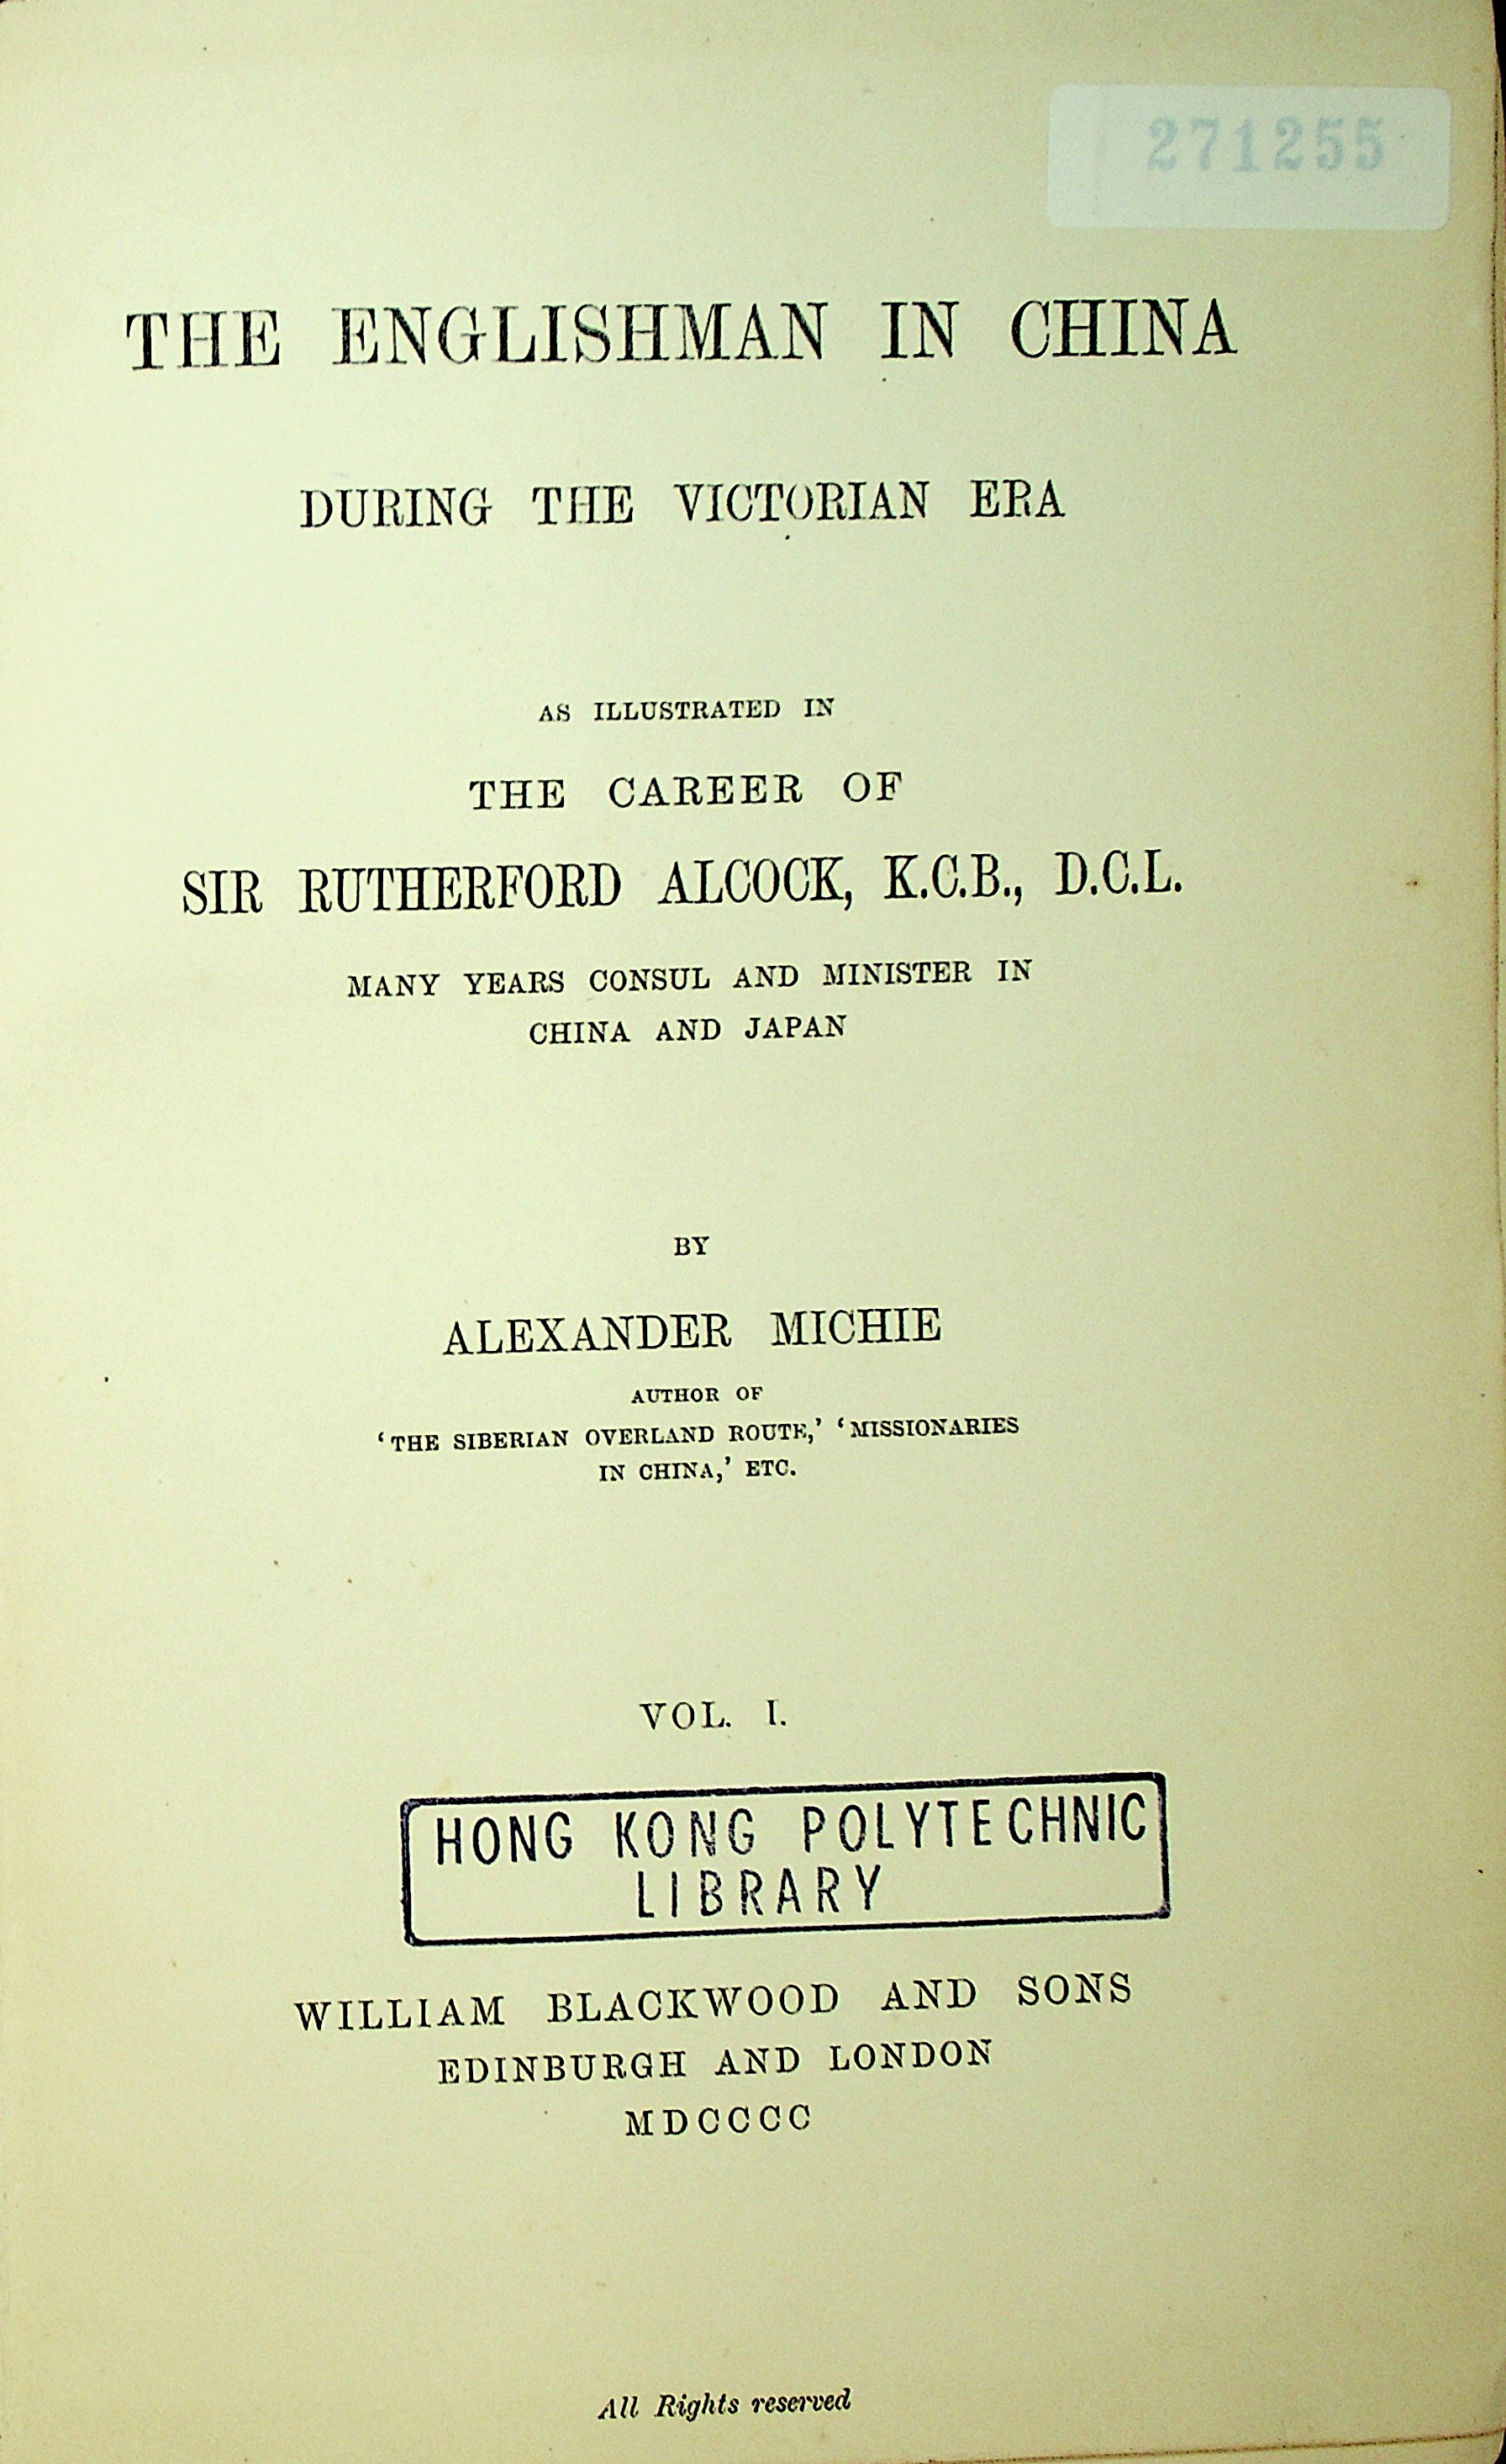 The Englishman in China during the Victorian era as illustrated in the career of Sir Rutherford Alcock. Volume 1